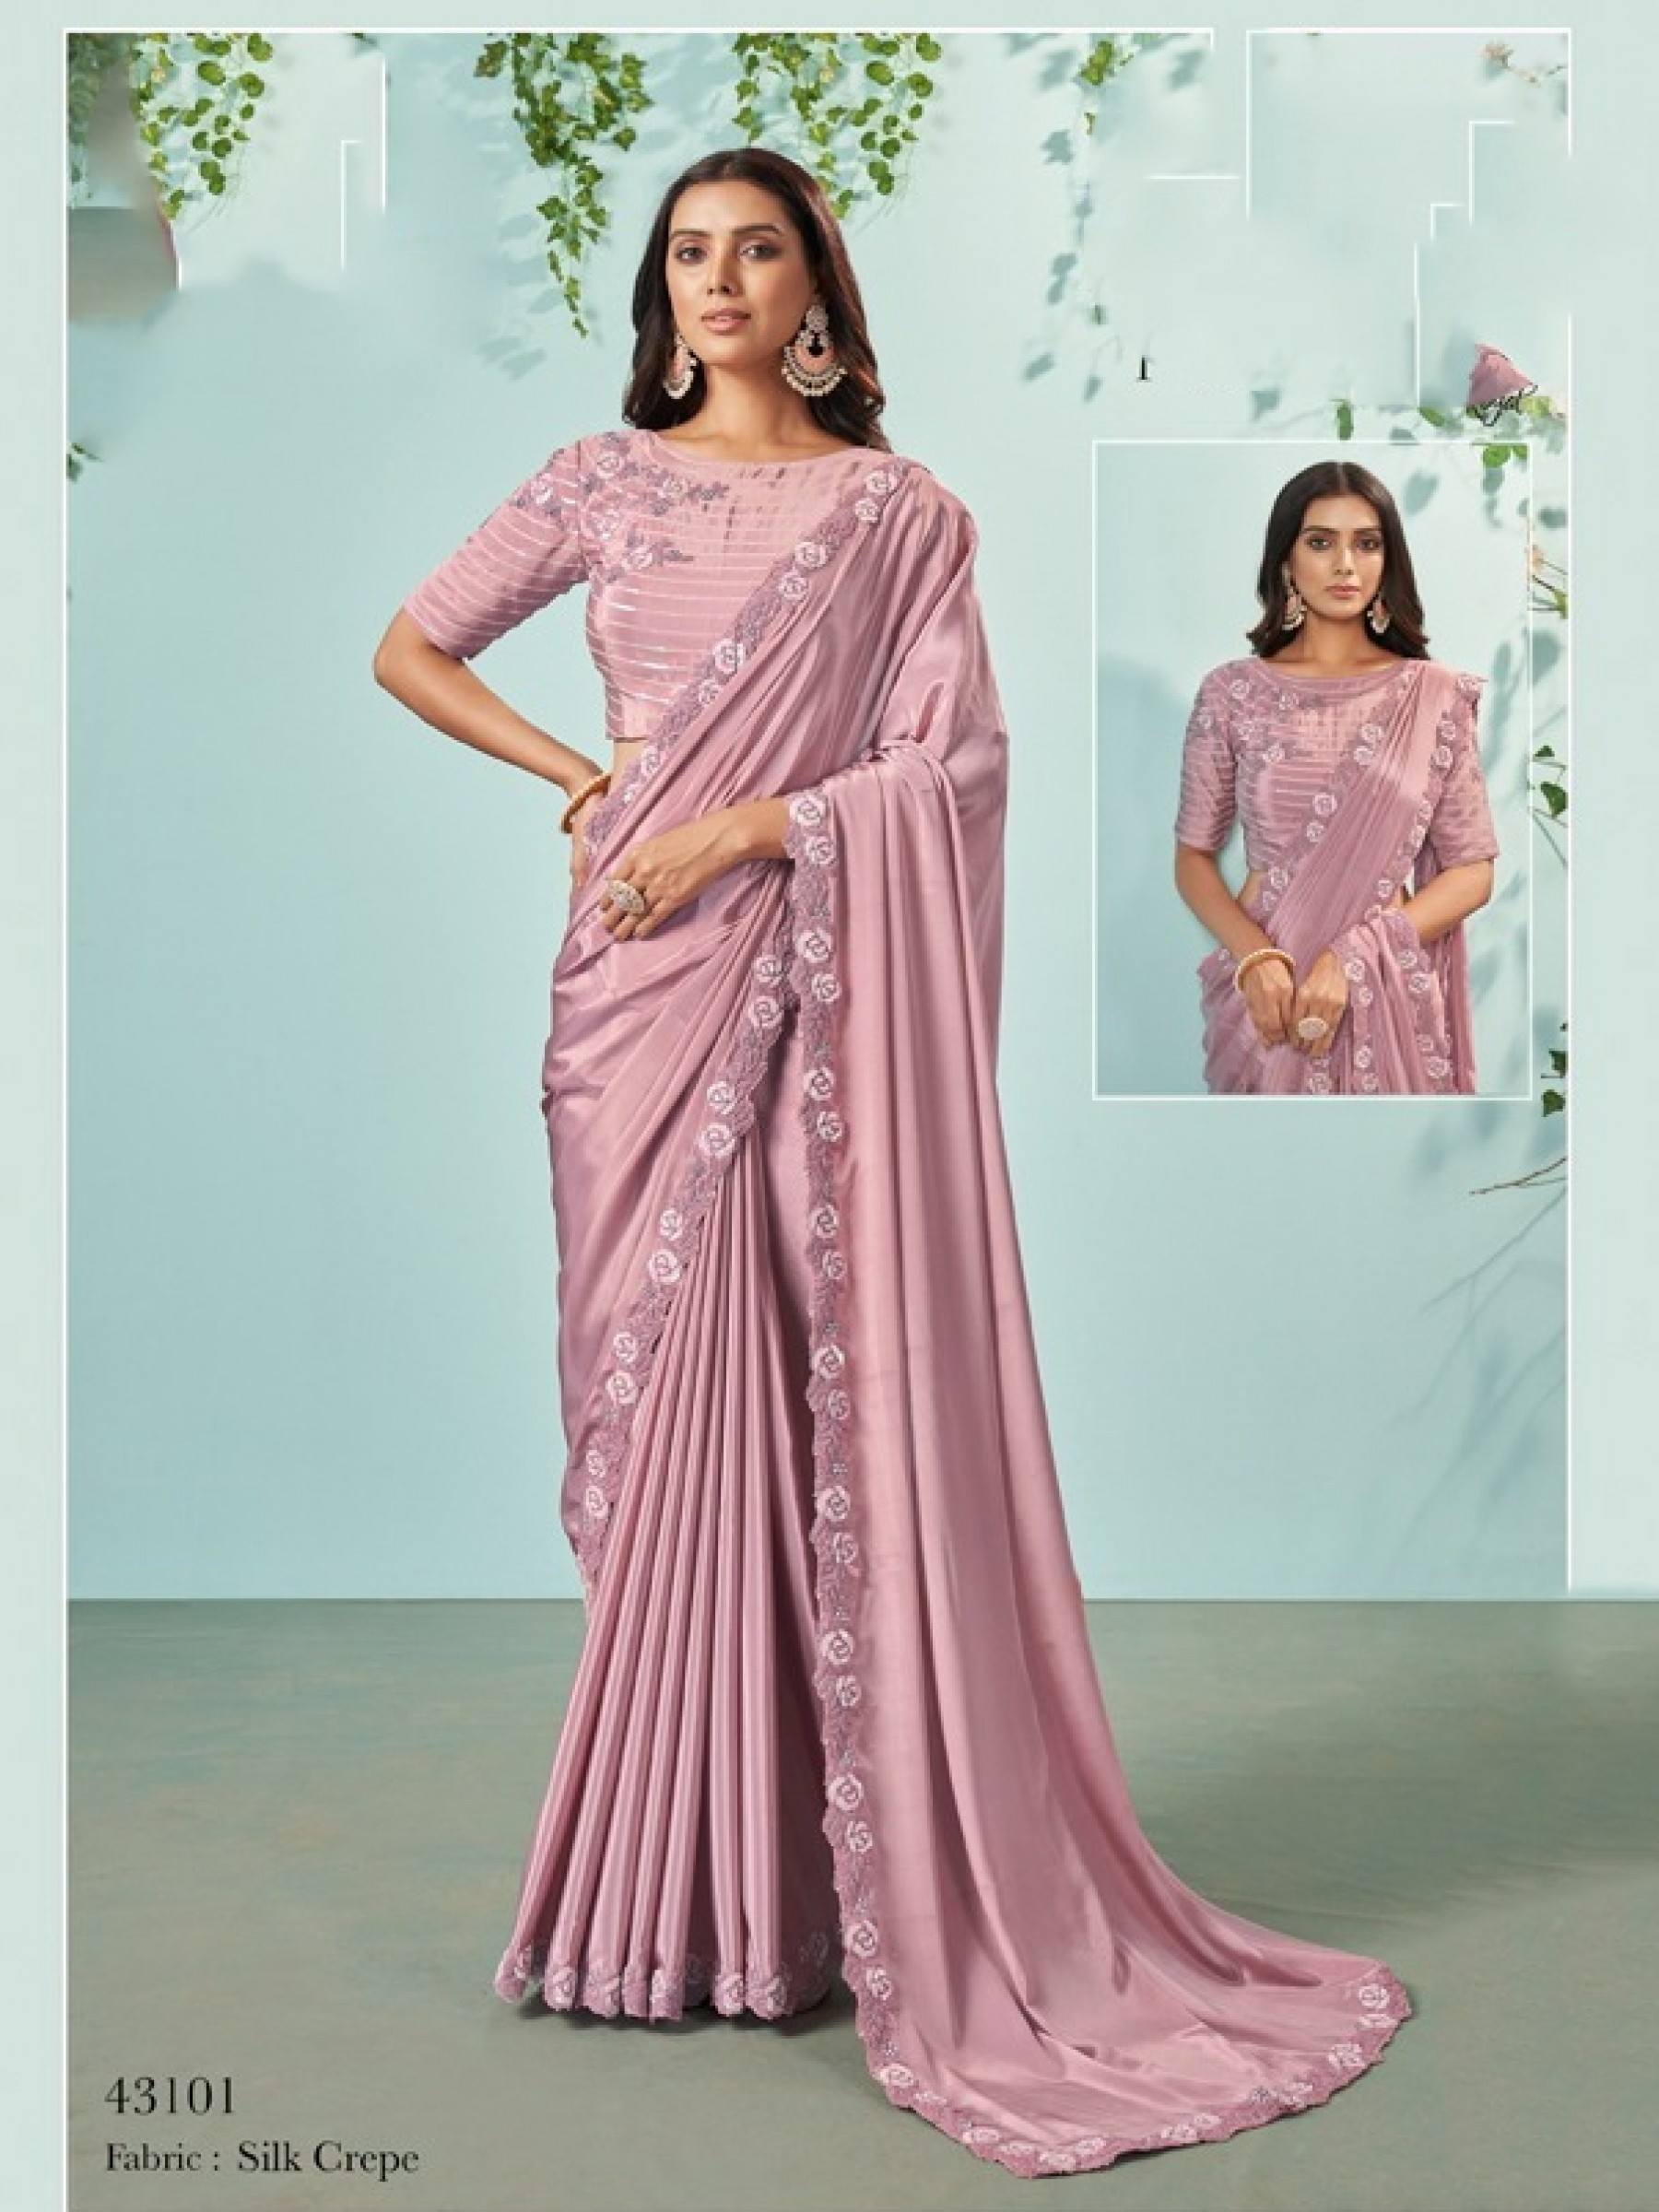 Silk Crape Saree In Pink Color With Embroidery Work